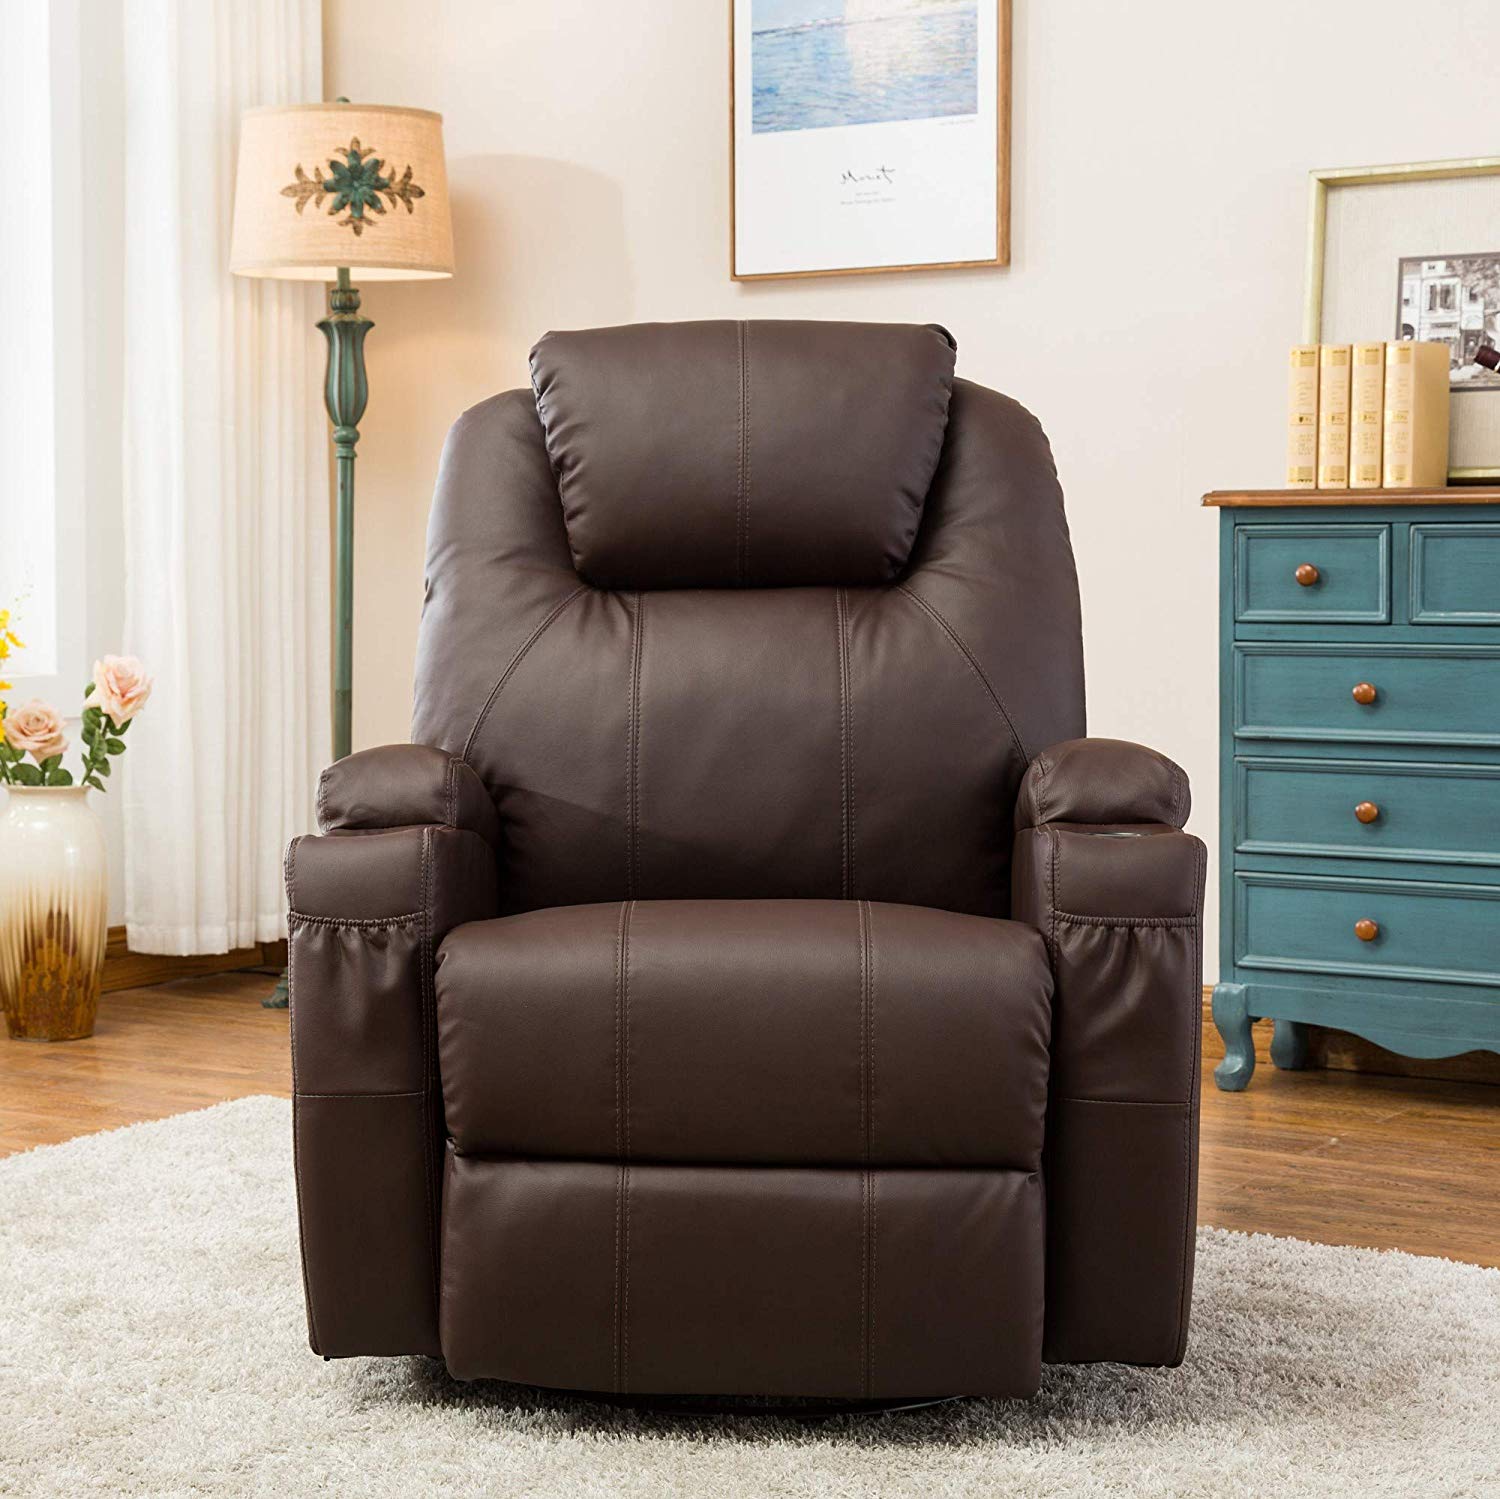 Mcombo Modern Massage Recliner Chair, Leather Recliners With Massage And Heat